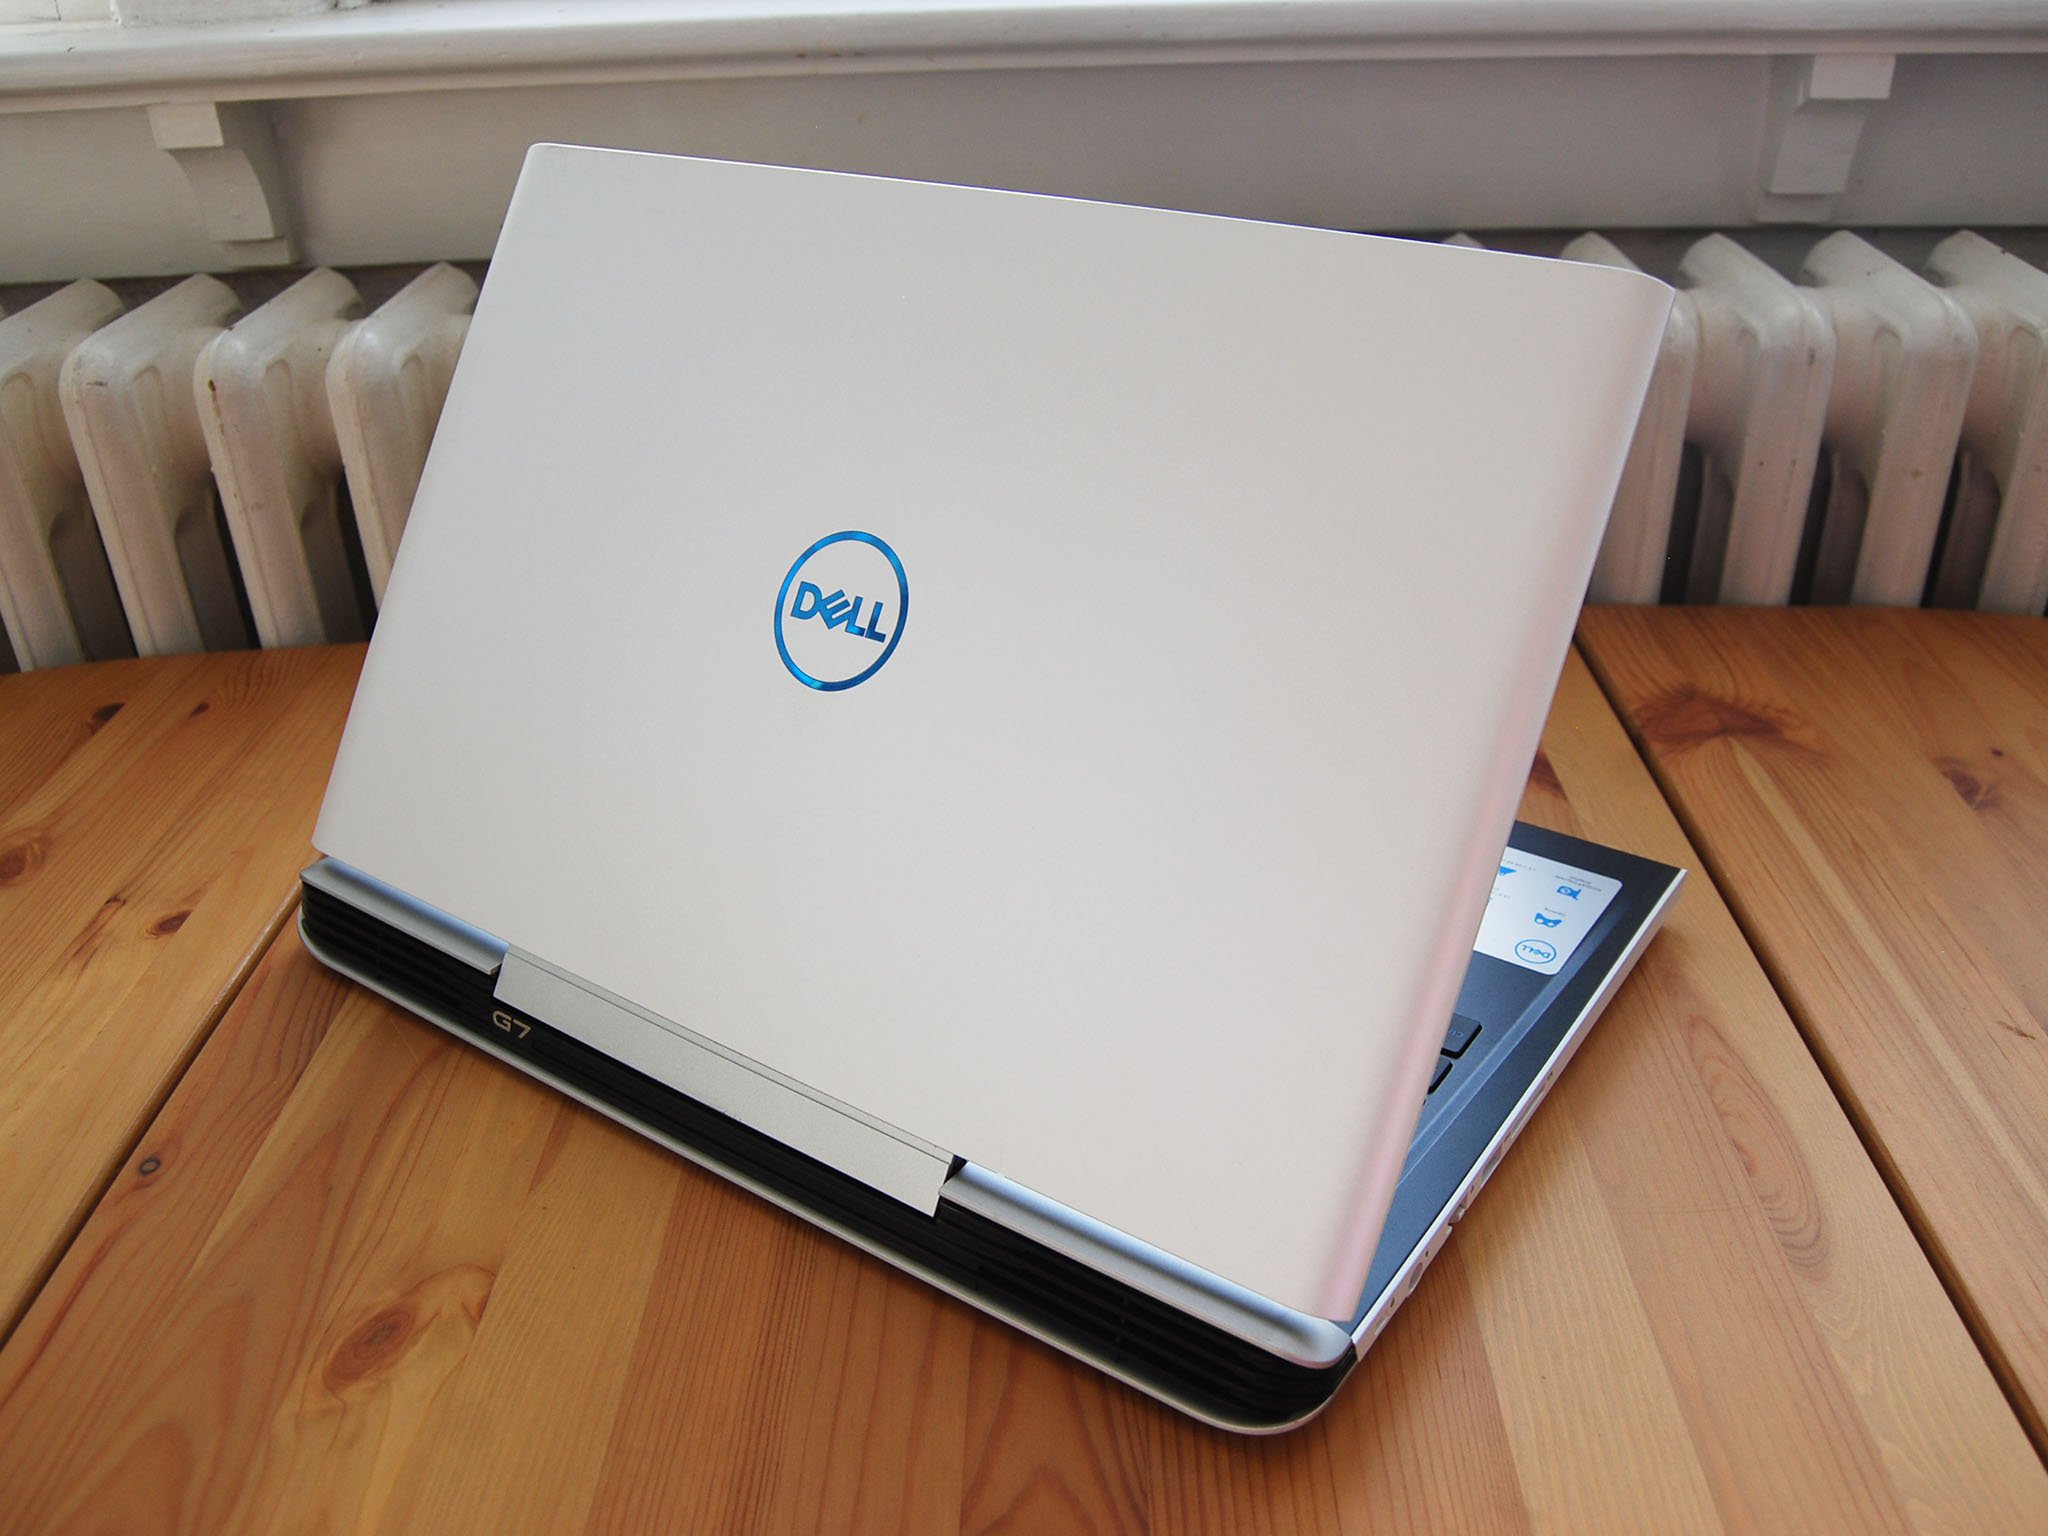 Dell G7 15 7588 review